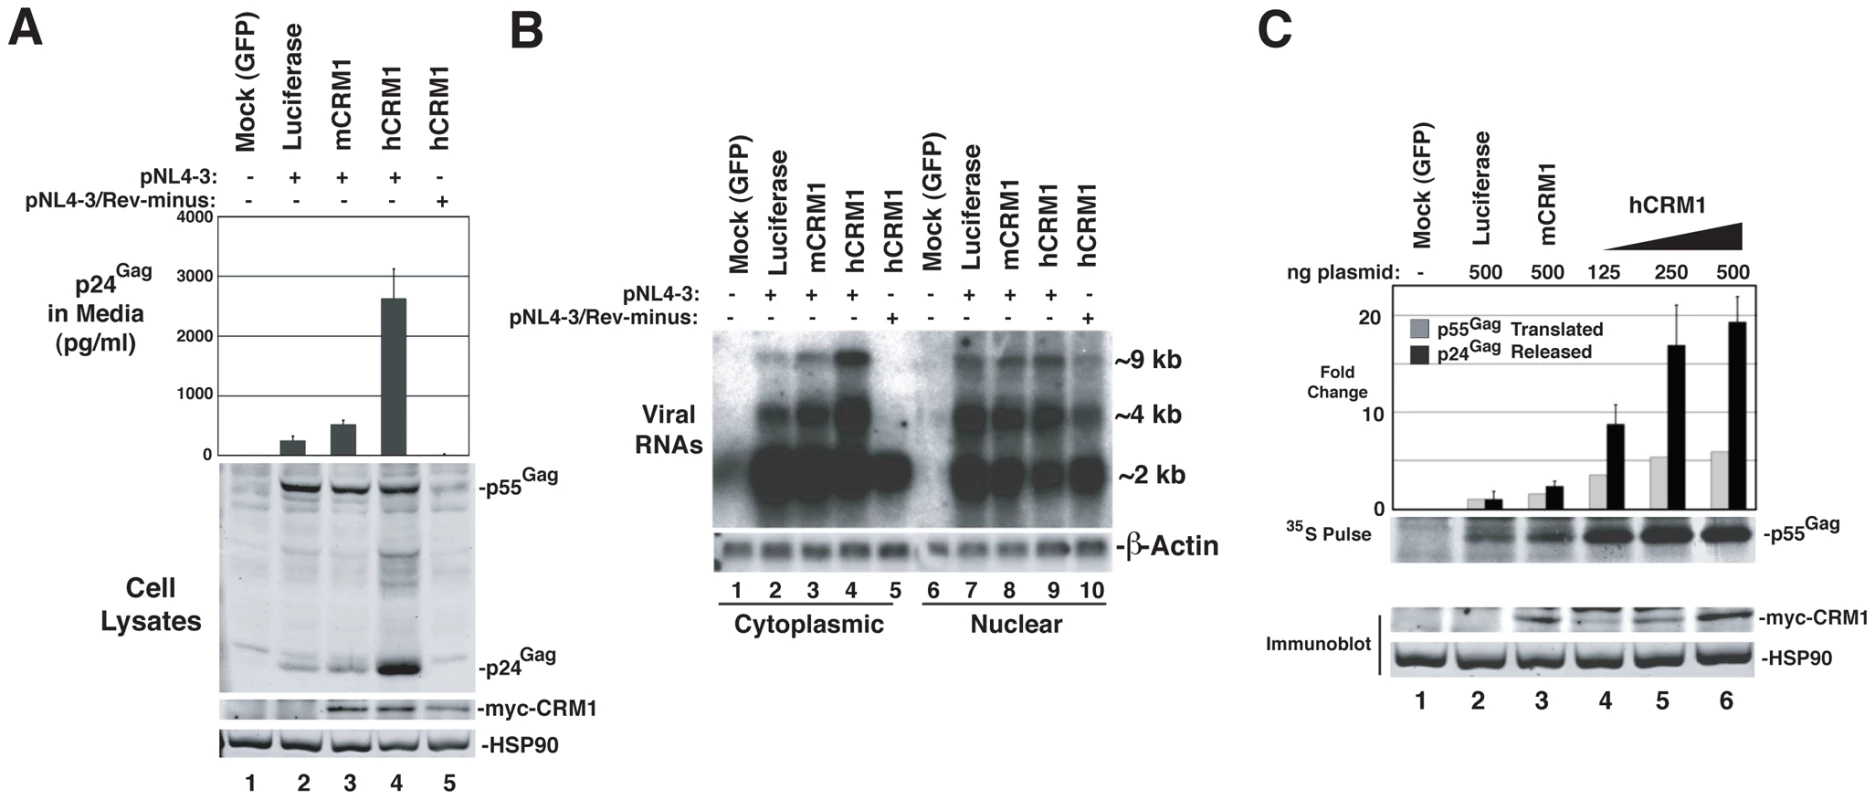 hCRM1 overcomes deficiencies in HIV-1 production in murine cells.